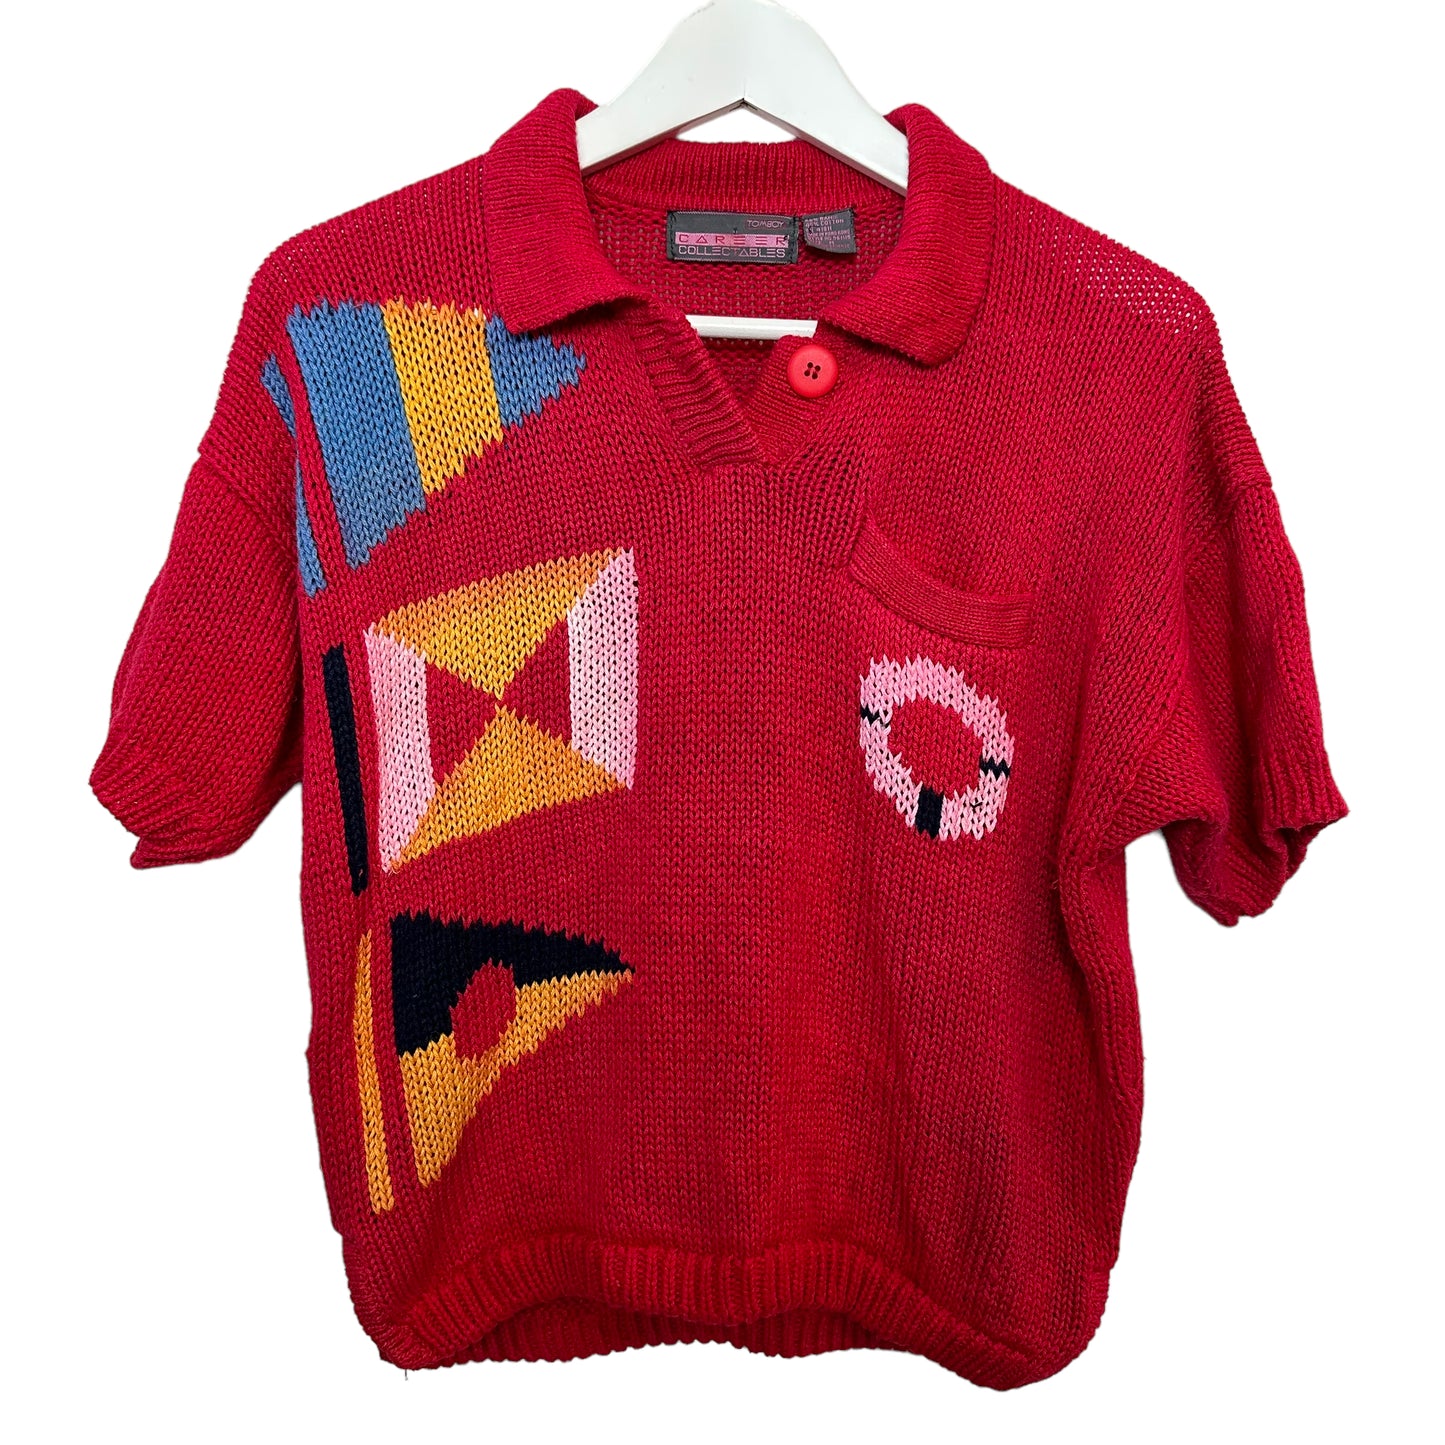 Vintage 90s Tomboy Career Collectables Knit Polo Sweater Cropped Red Medium